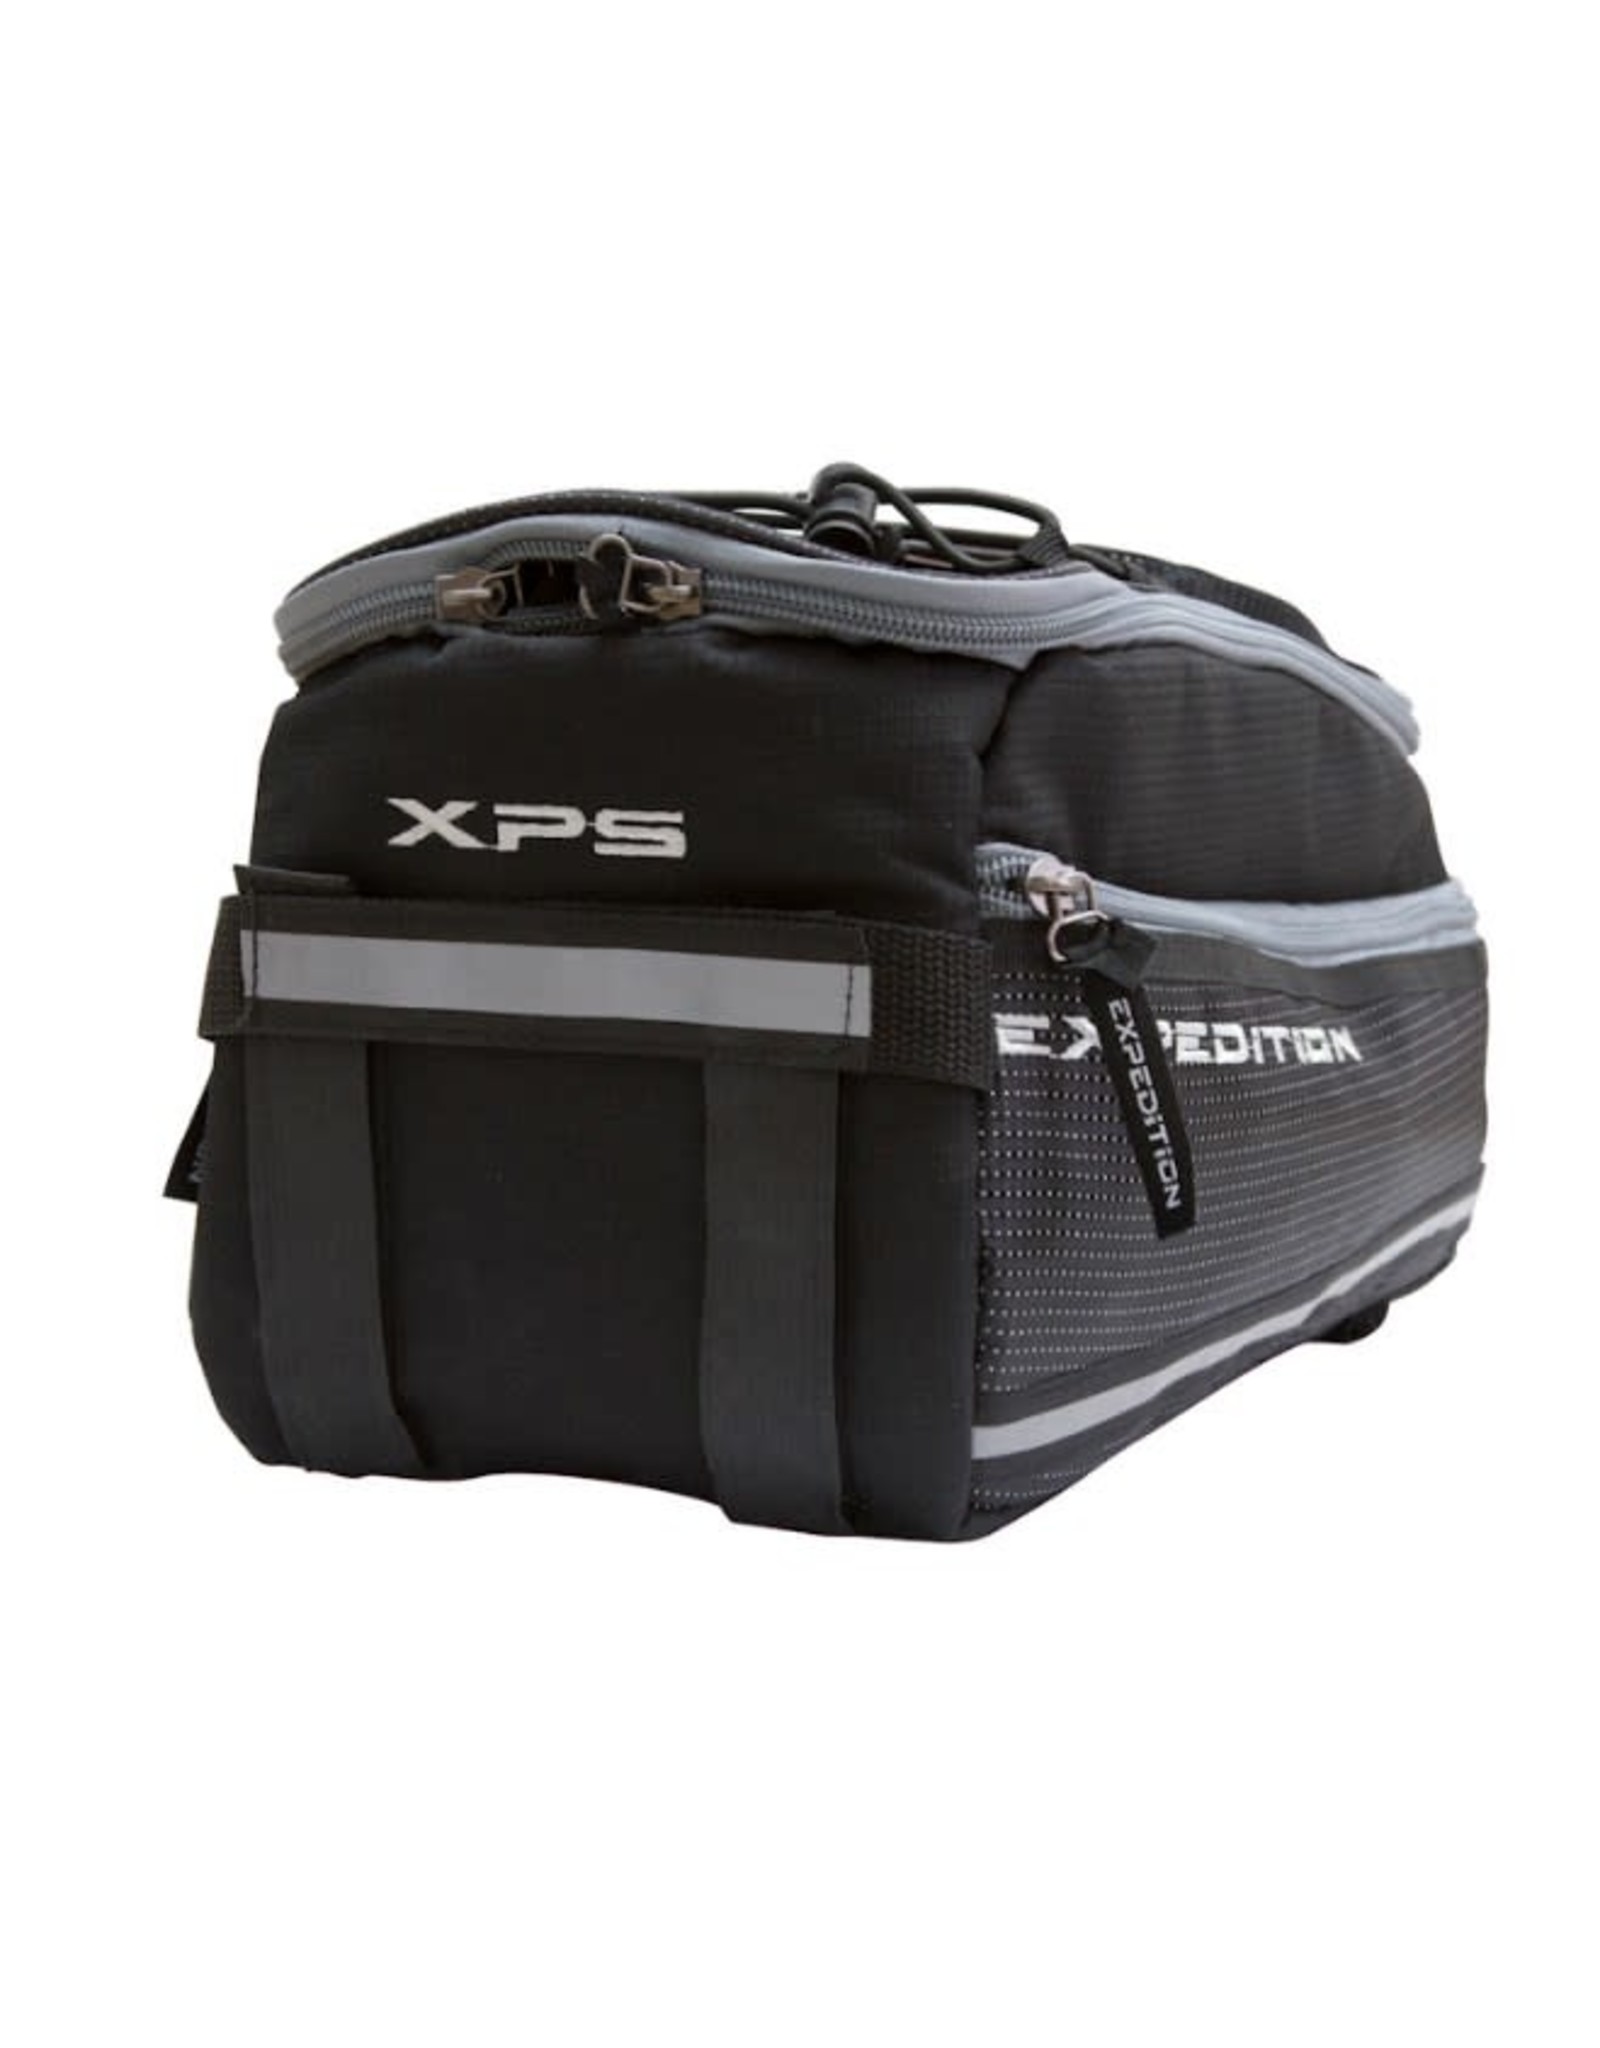 Expedition XPE trunkbag 11L (12"3/4x8x7)